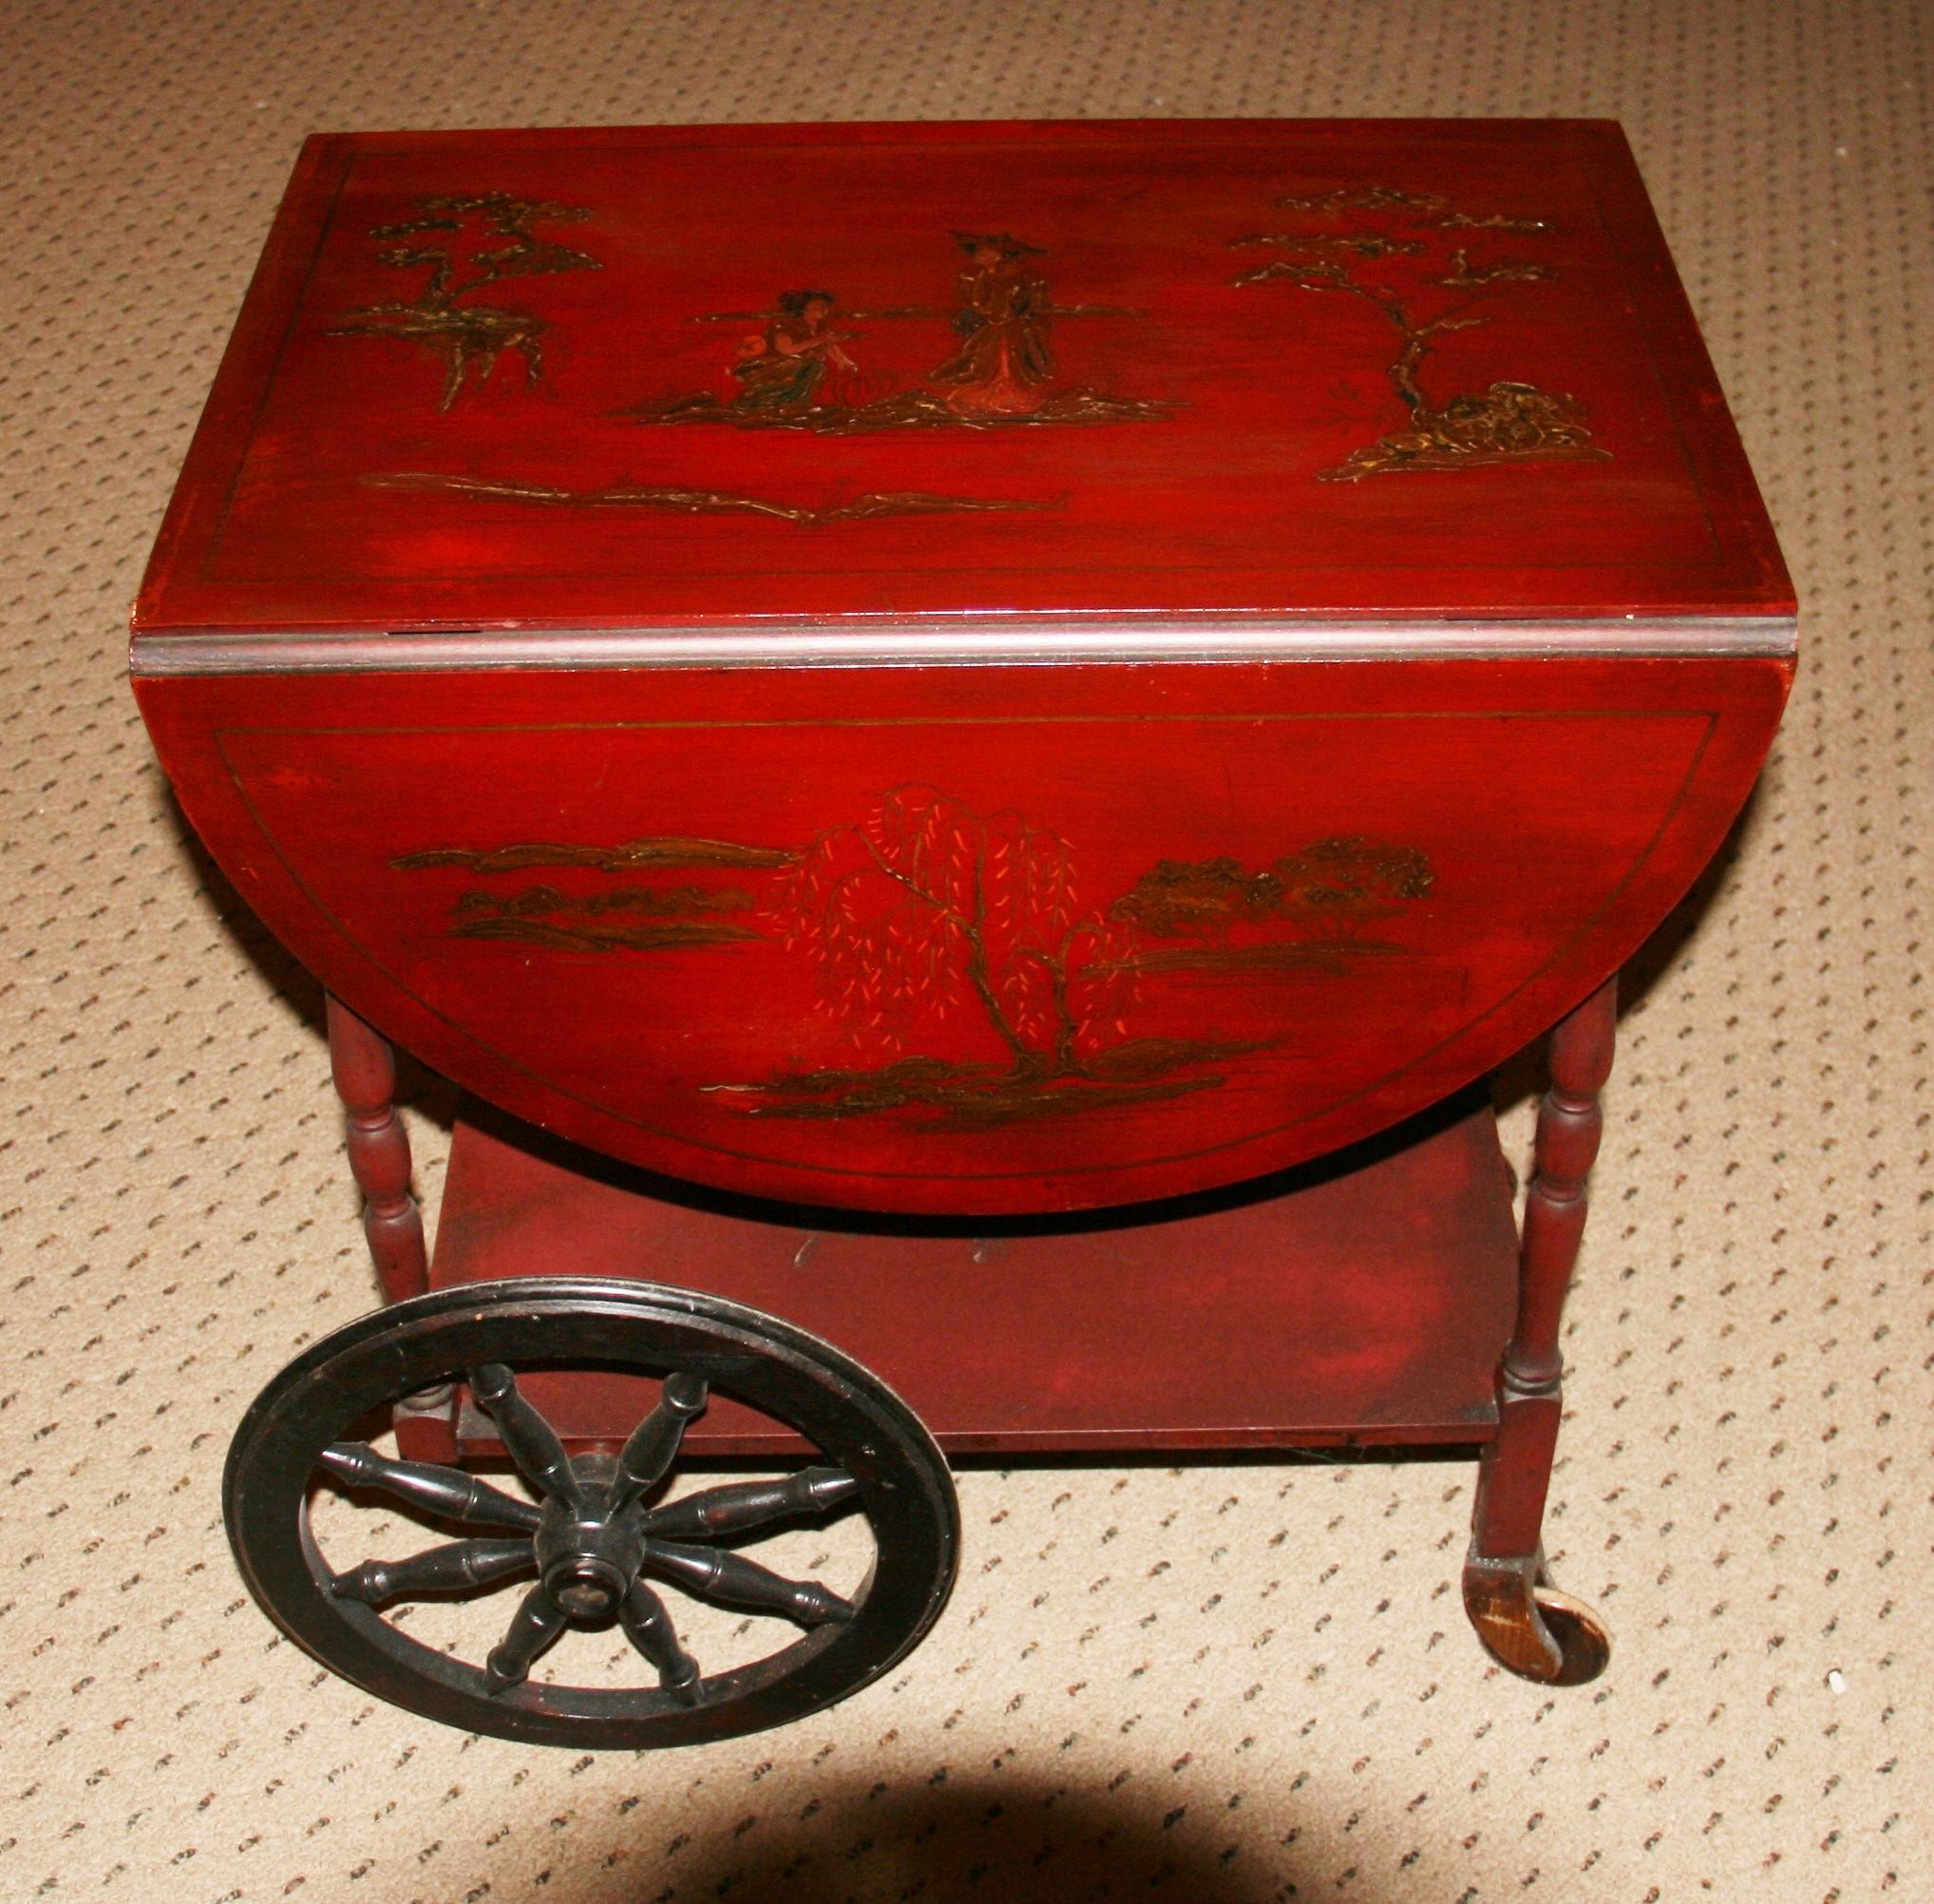 1480 Rare hand decorated tea cart with storage drawer
Drop down shelves 43